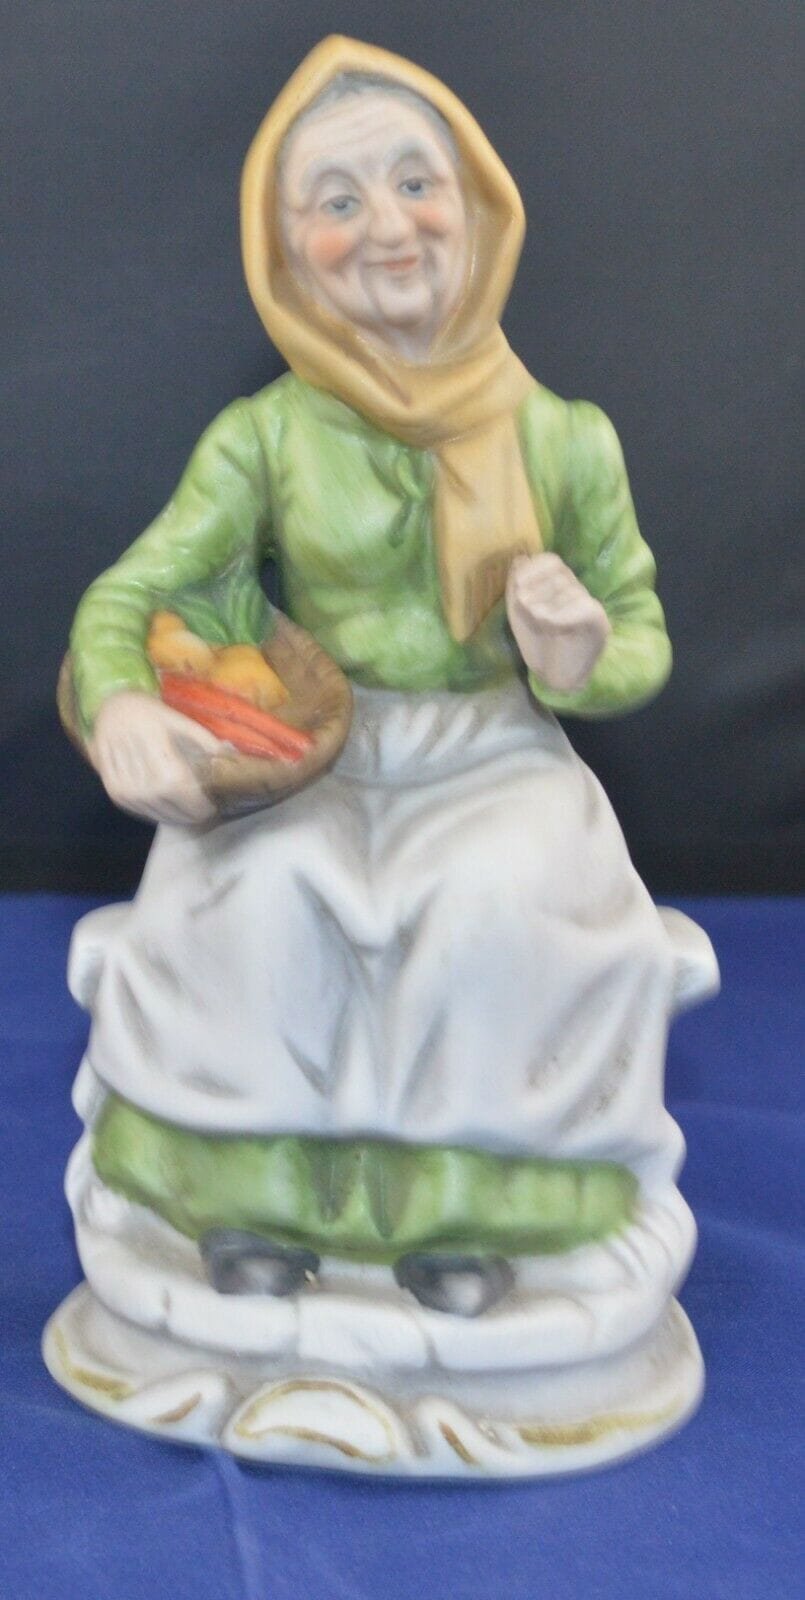 DECORATIVE FIGURINE LADY SITTING WITH A BASKET OF VEG(PREVIOUSLY OWNED)GOOD CONDITION - TMD167207